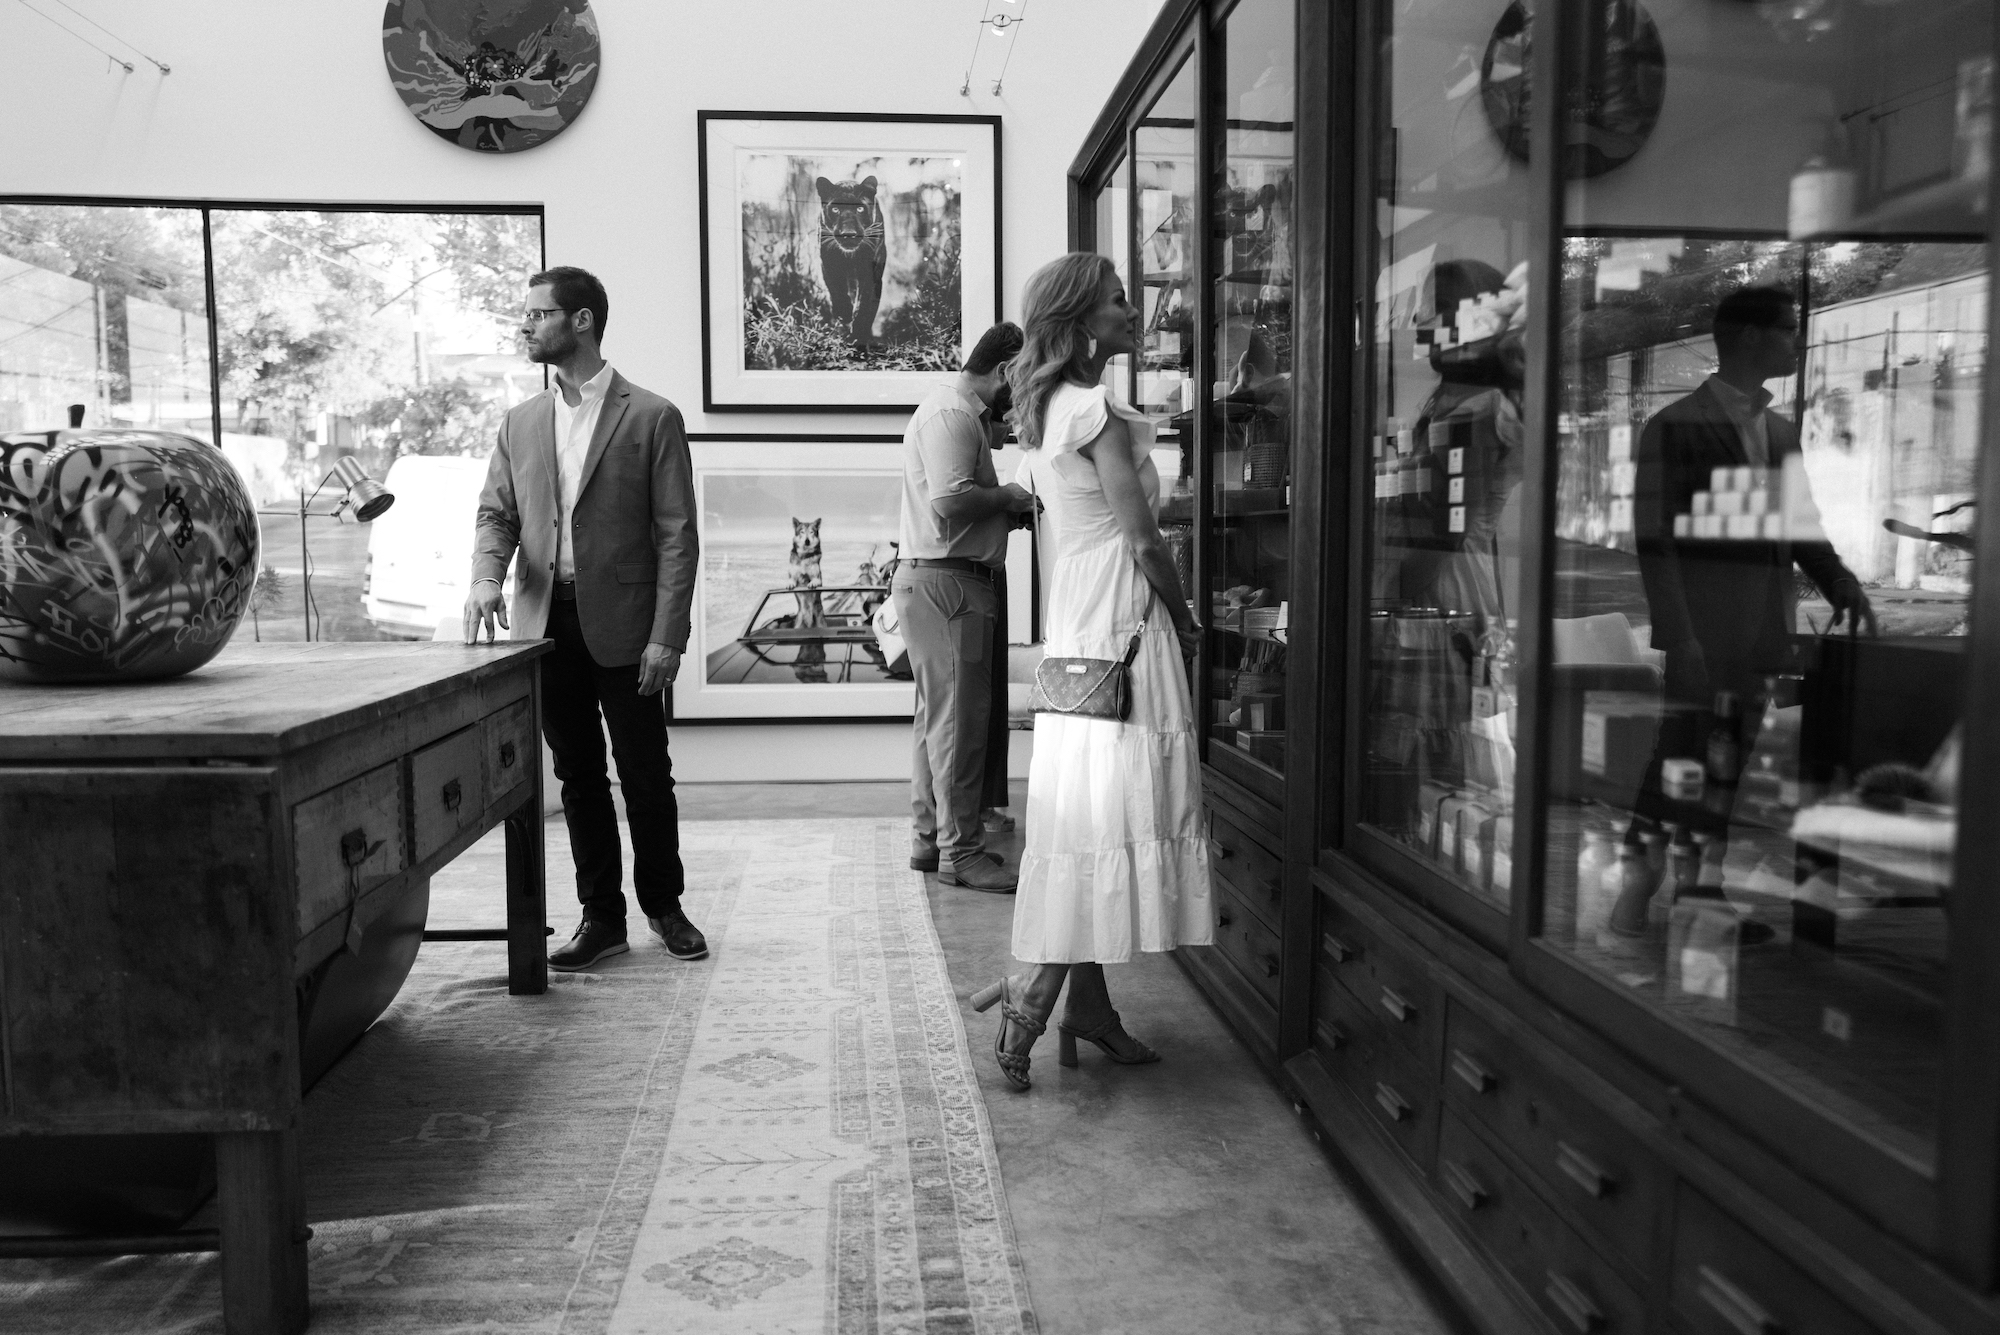 Visitors in the Christopher Collection showroom in Birmingham, Alabama - Effect Magazine